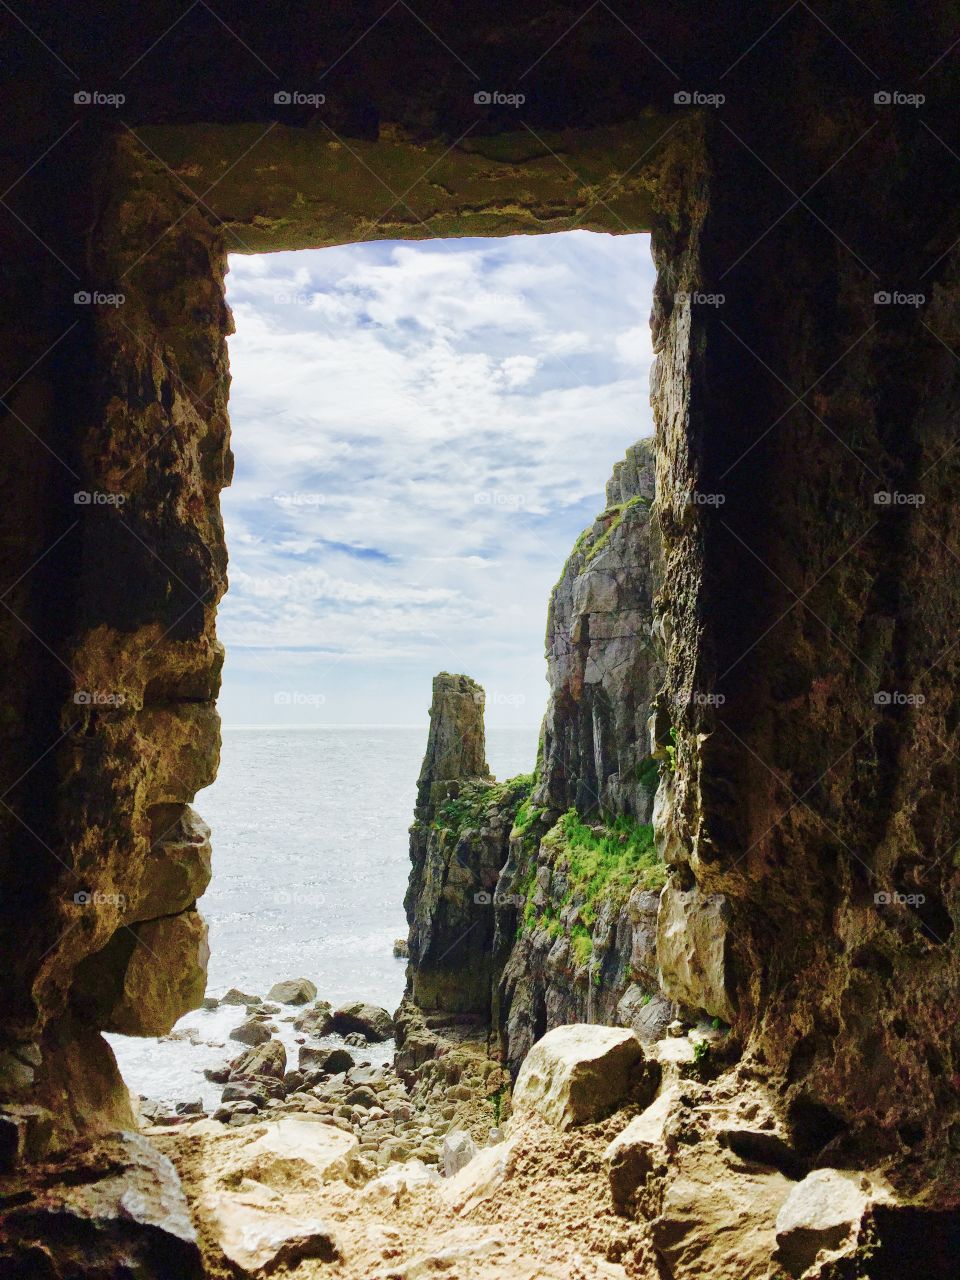 Doorway to the quiet life, tranquility with just the sound of the waves below.